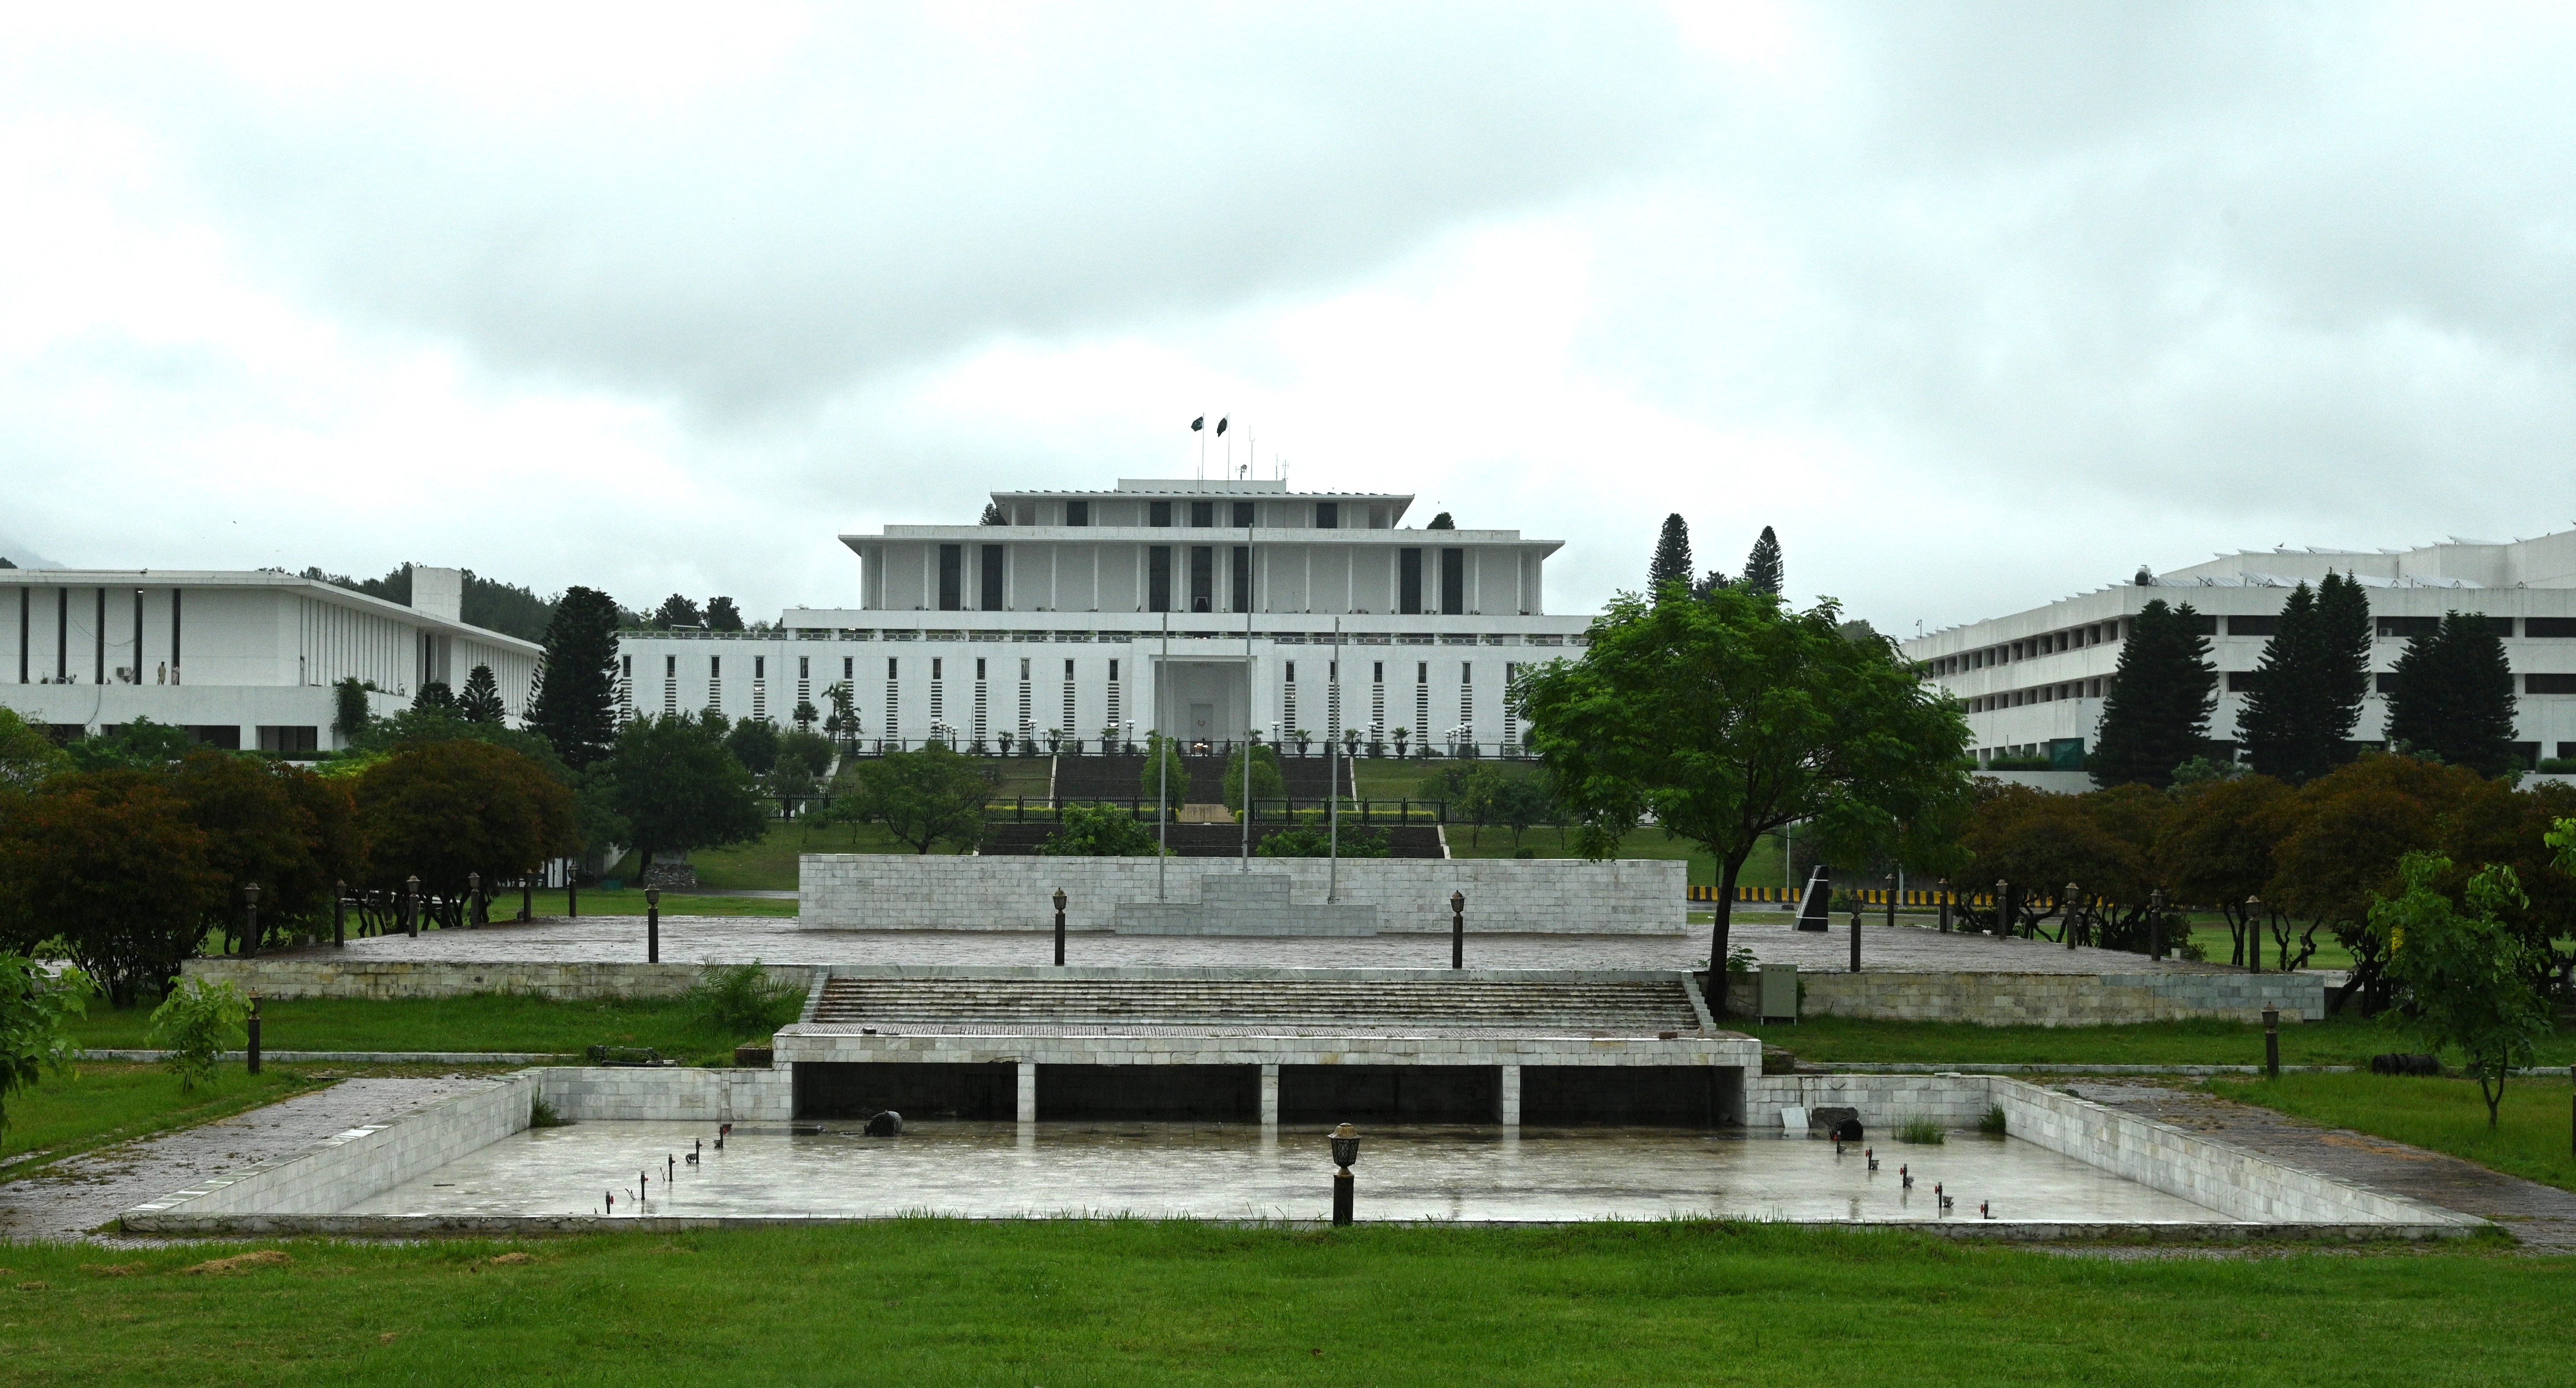 The parliament house in Red Zone area